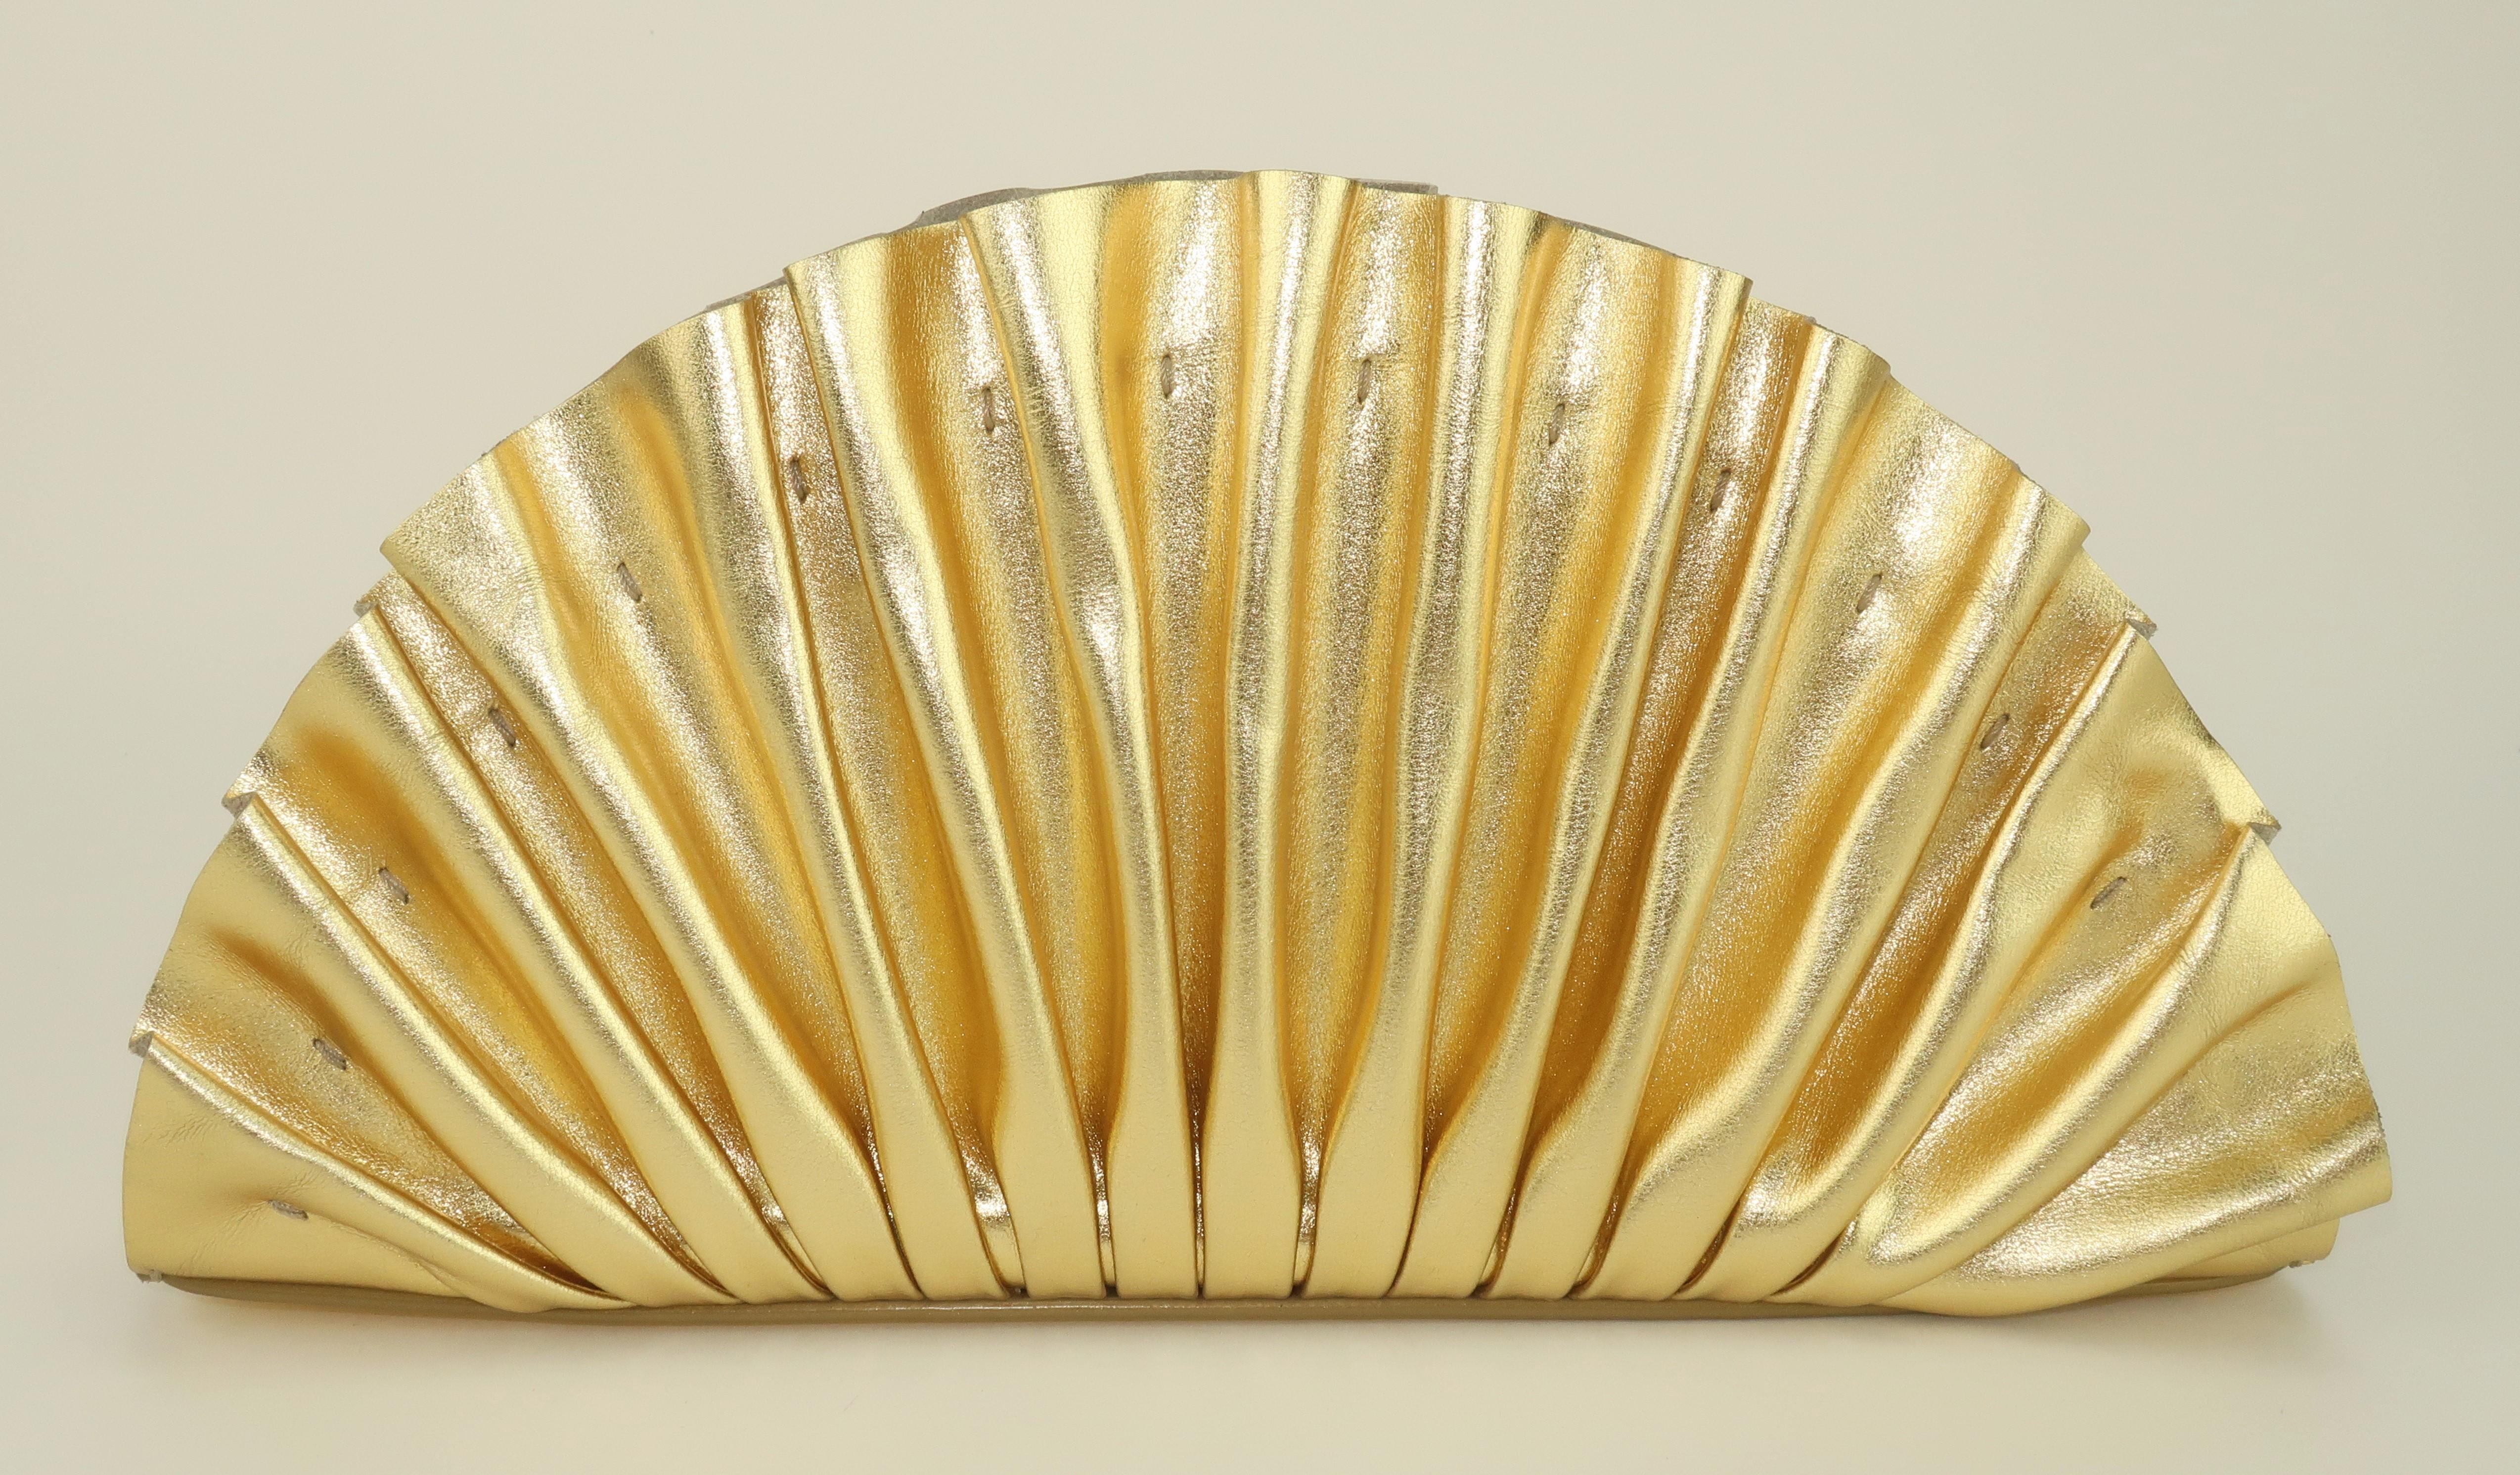 Get the gold!  Cult Gaia creates a lovely Art Deco inspired gold leather clutch handbag in the ultra feminine shape of a fan.  Beautifully detailed, the Nala Mini Clutch includes pleated folds and exposed stitching, all in sumptuous high quality